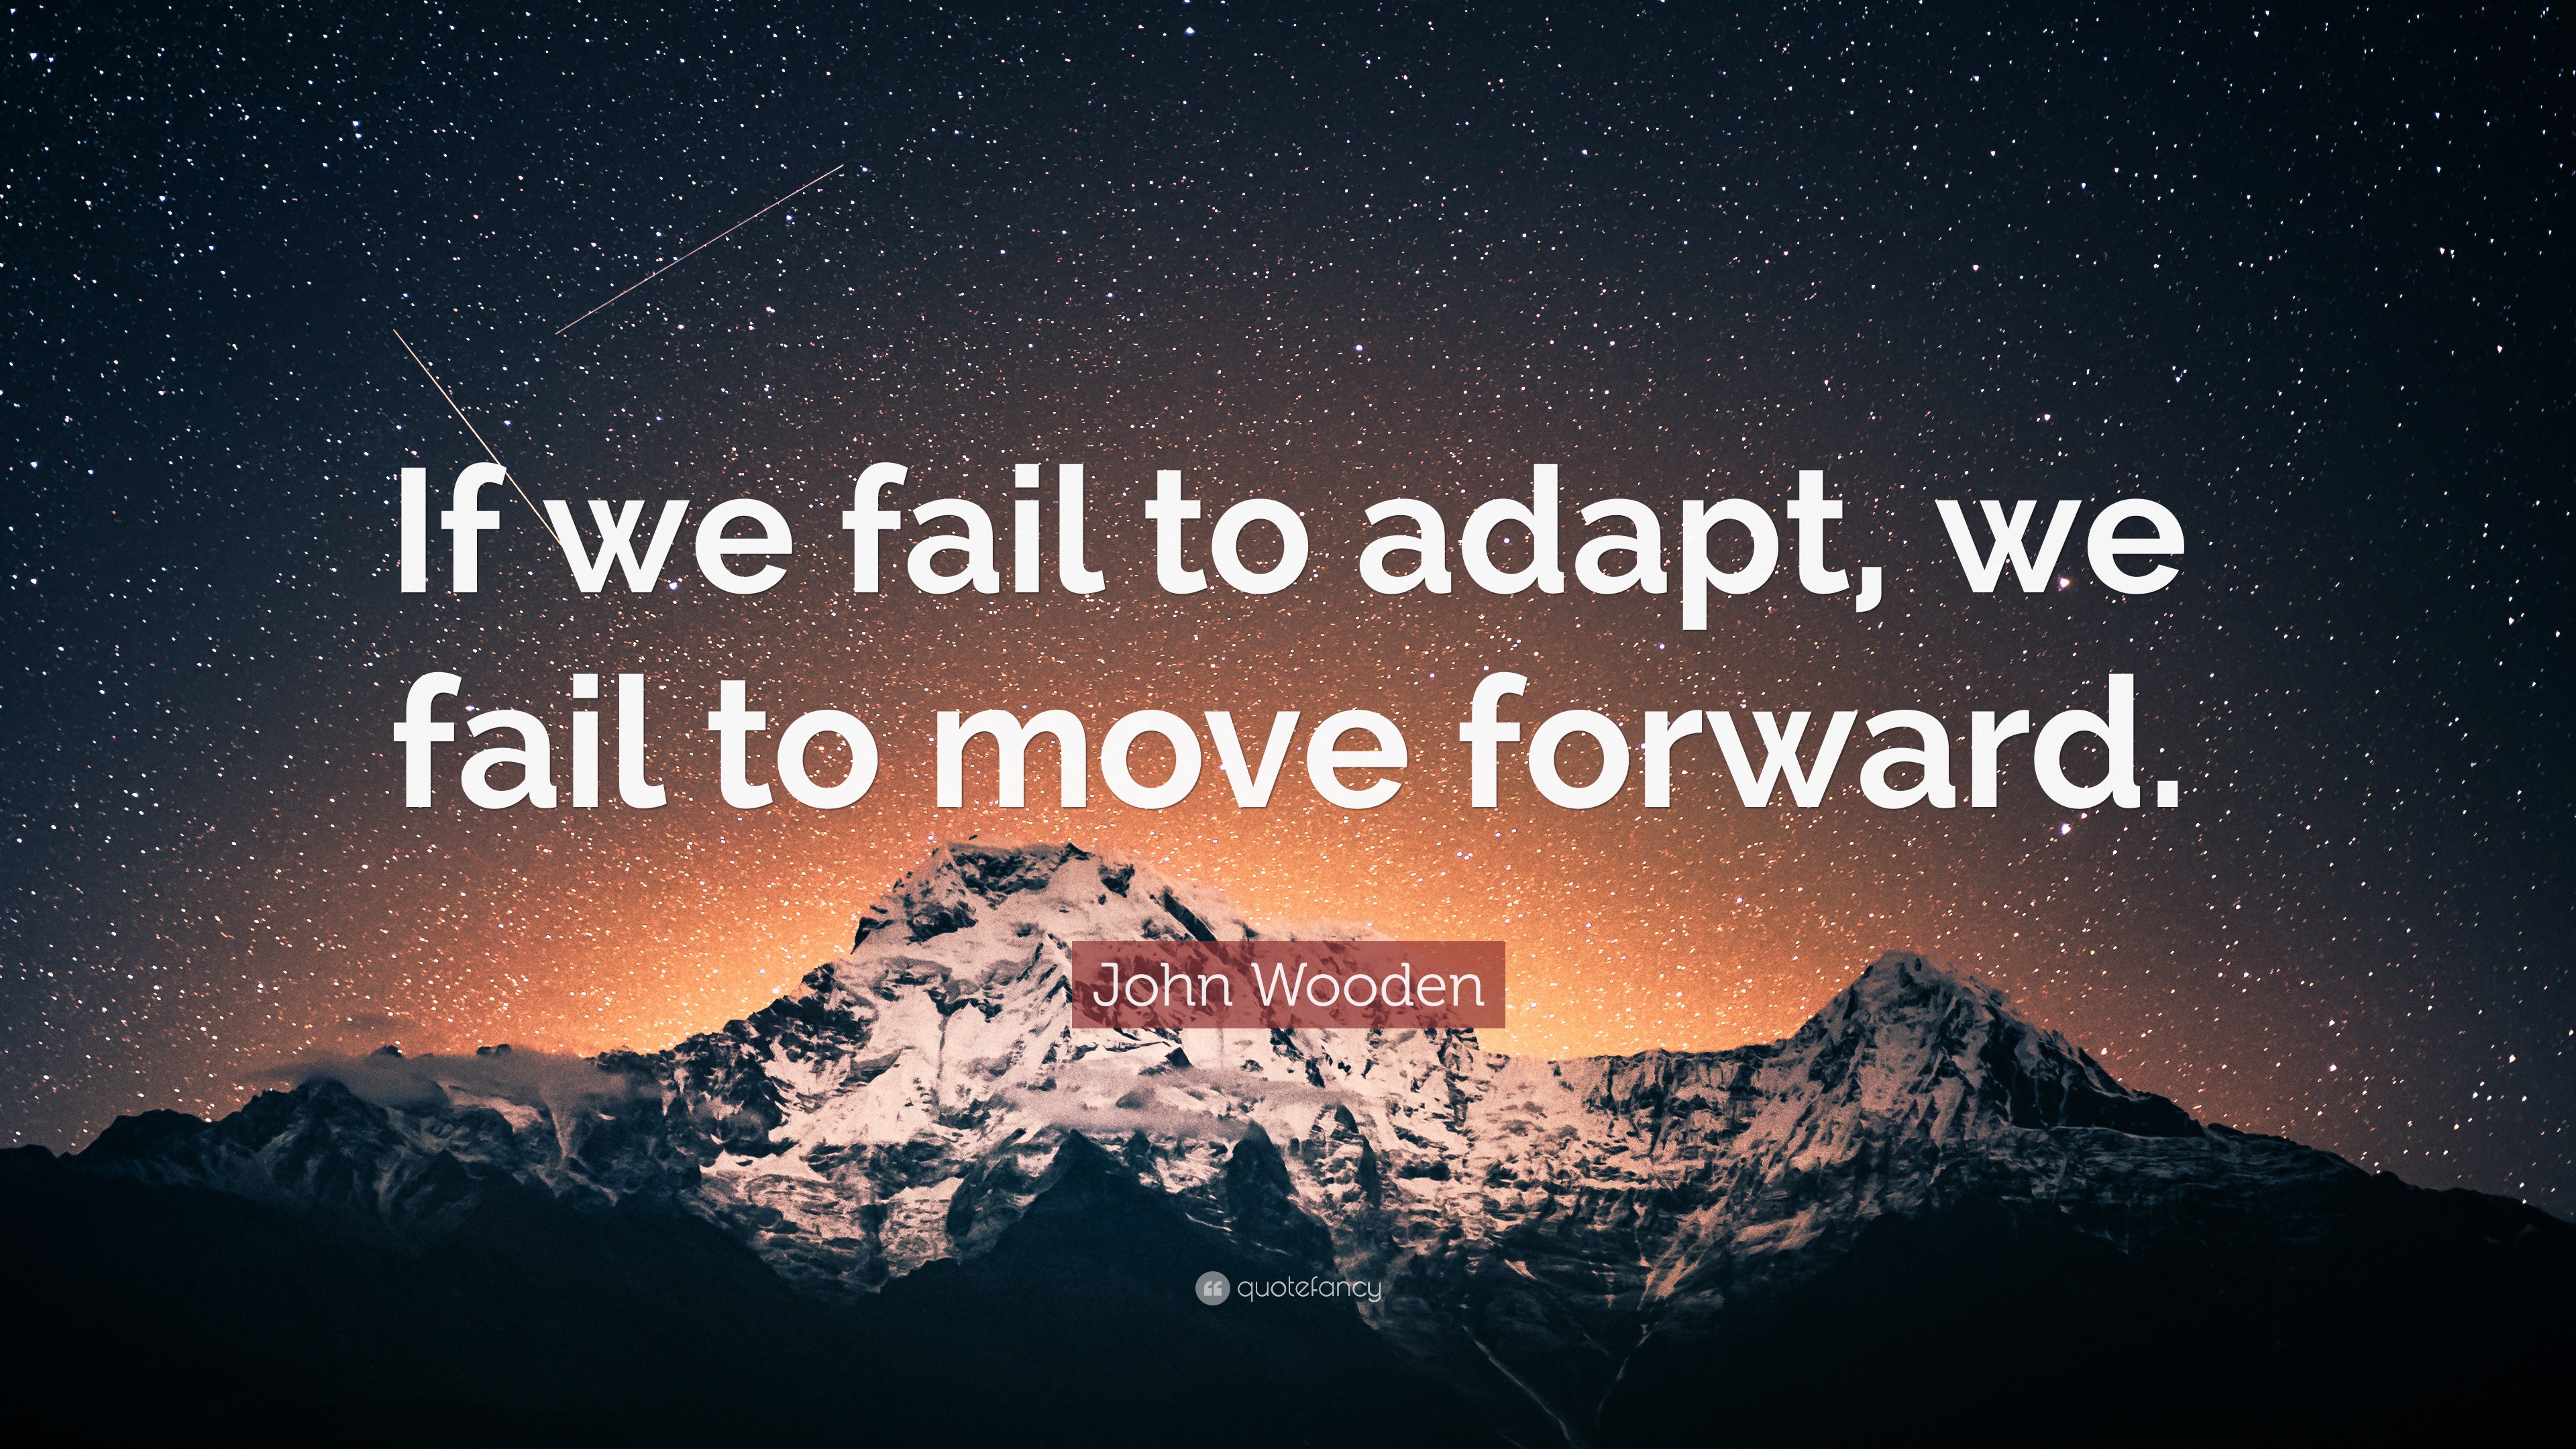 John Wooden Quote: “If we fail to adapt, we fail to move forward.”